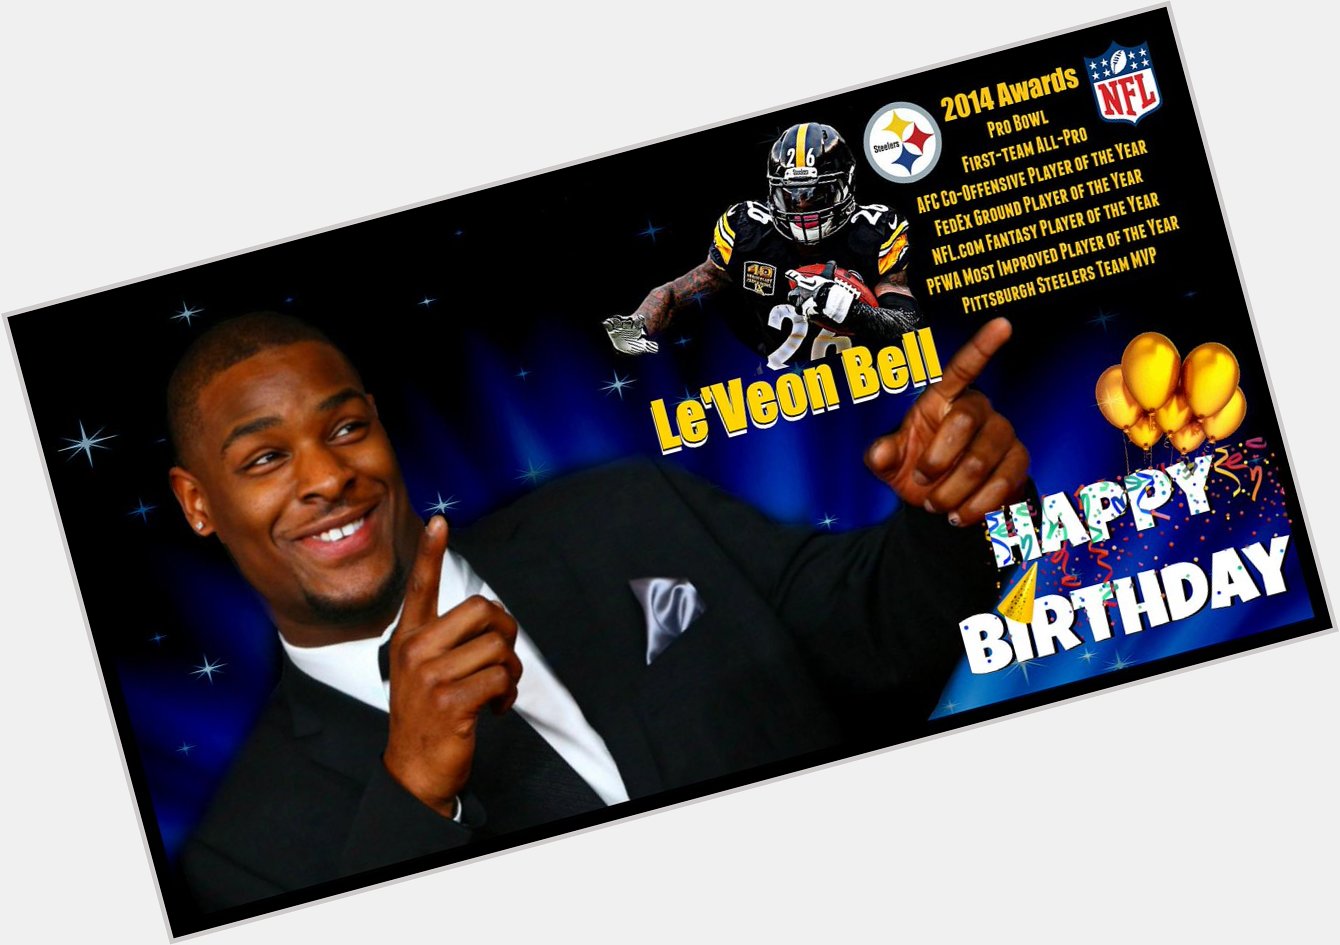 Wishing Steelers MVP/Superstar/Icon/Amazing Le\Veon Bell a very Happy 23rd BDay!  